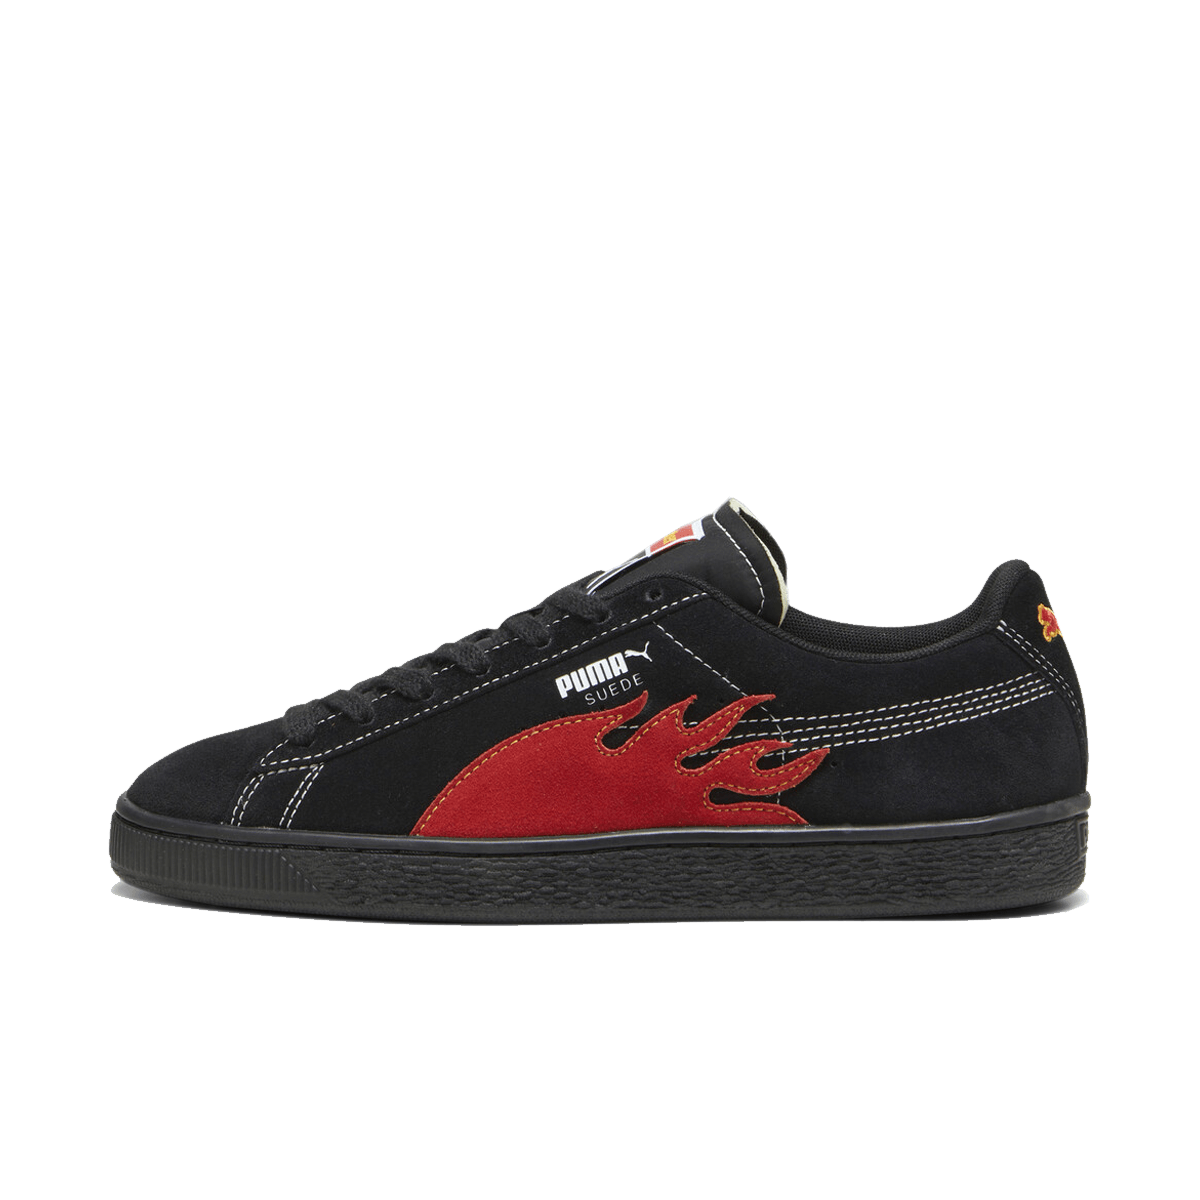 Butter Goods x Puma Suede Classic 'Flame' 396127-01